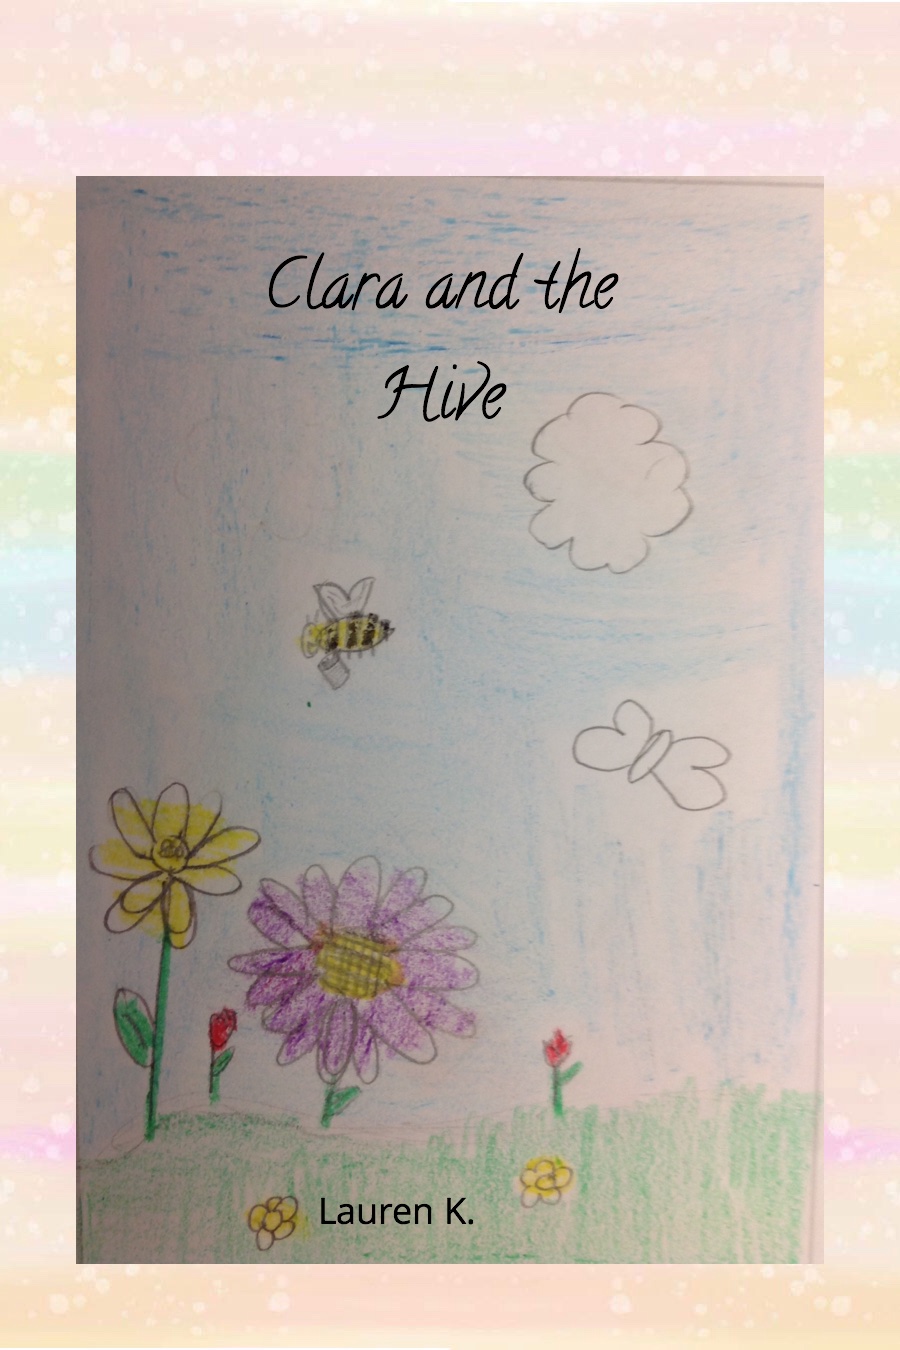 Clara and the Hive by Lauren K